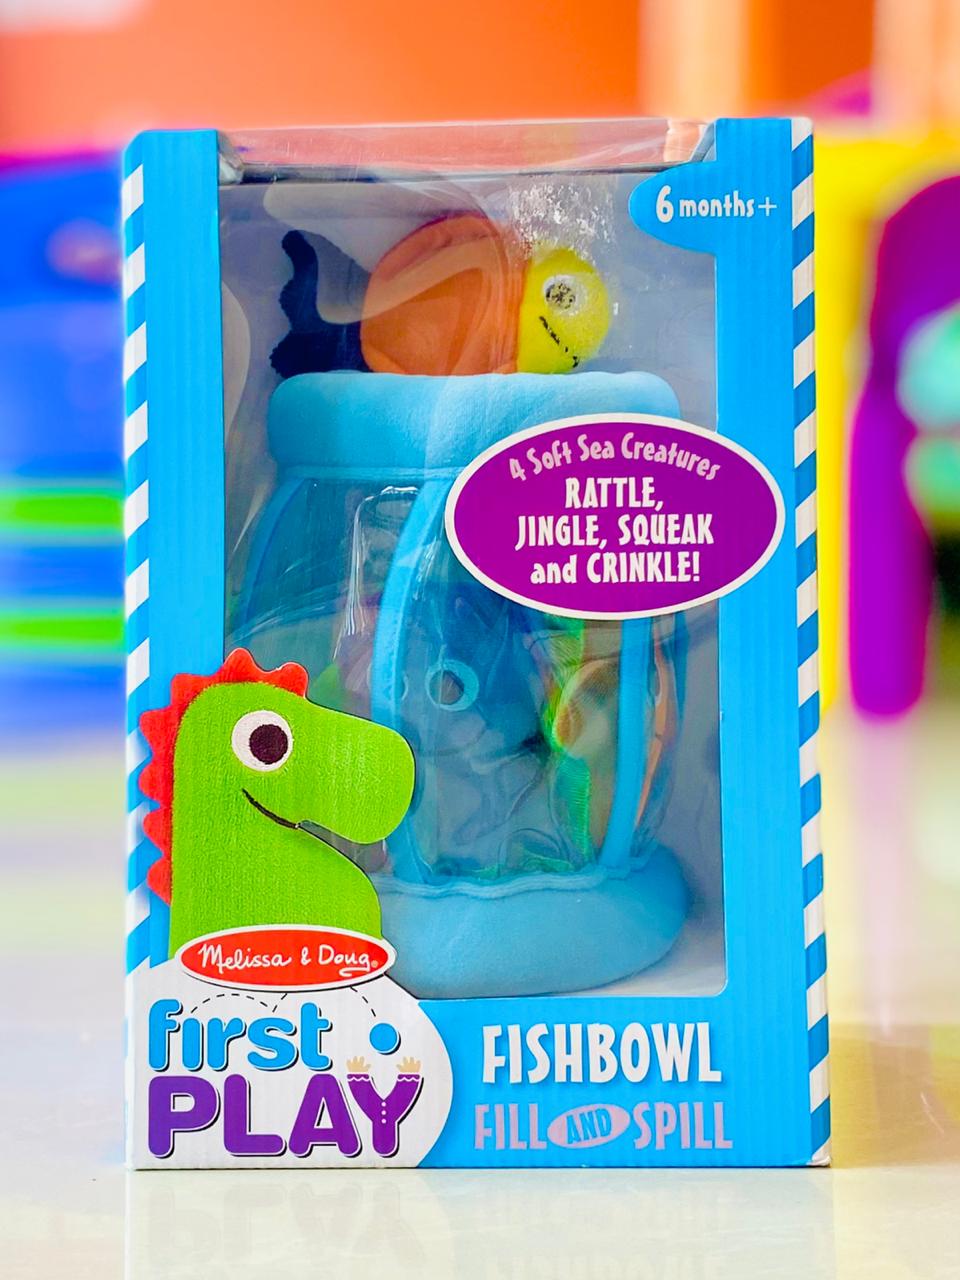 fishbowl fill and spill